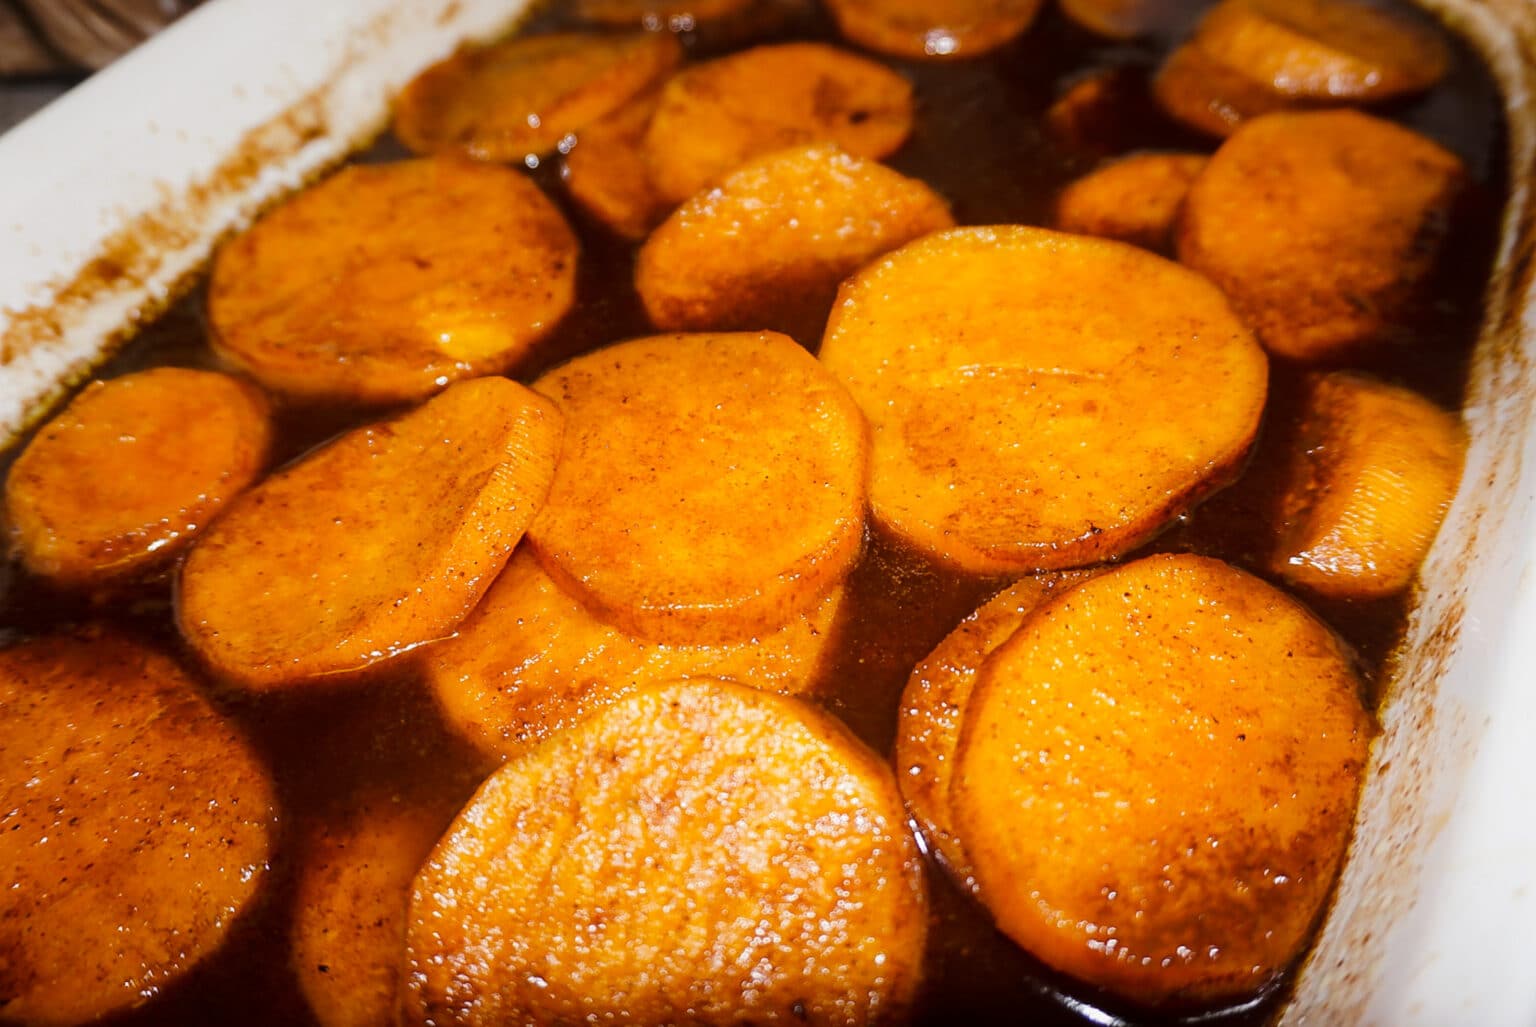 Grandma's Candied Yams Recipe (Southern Candied Yams) - Let's Eat Cuisine